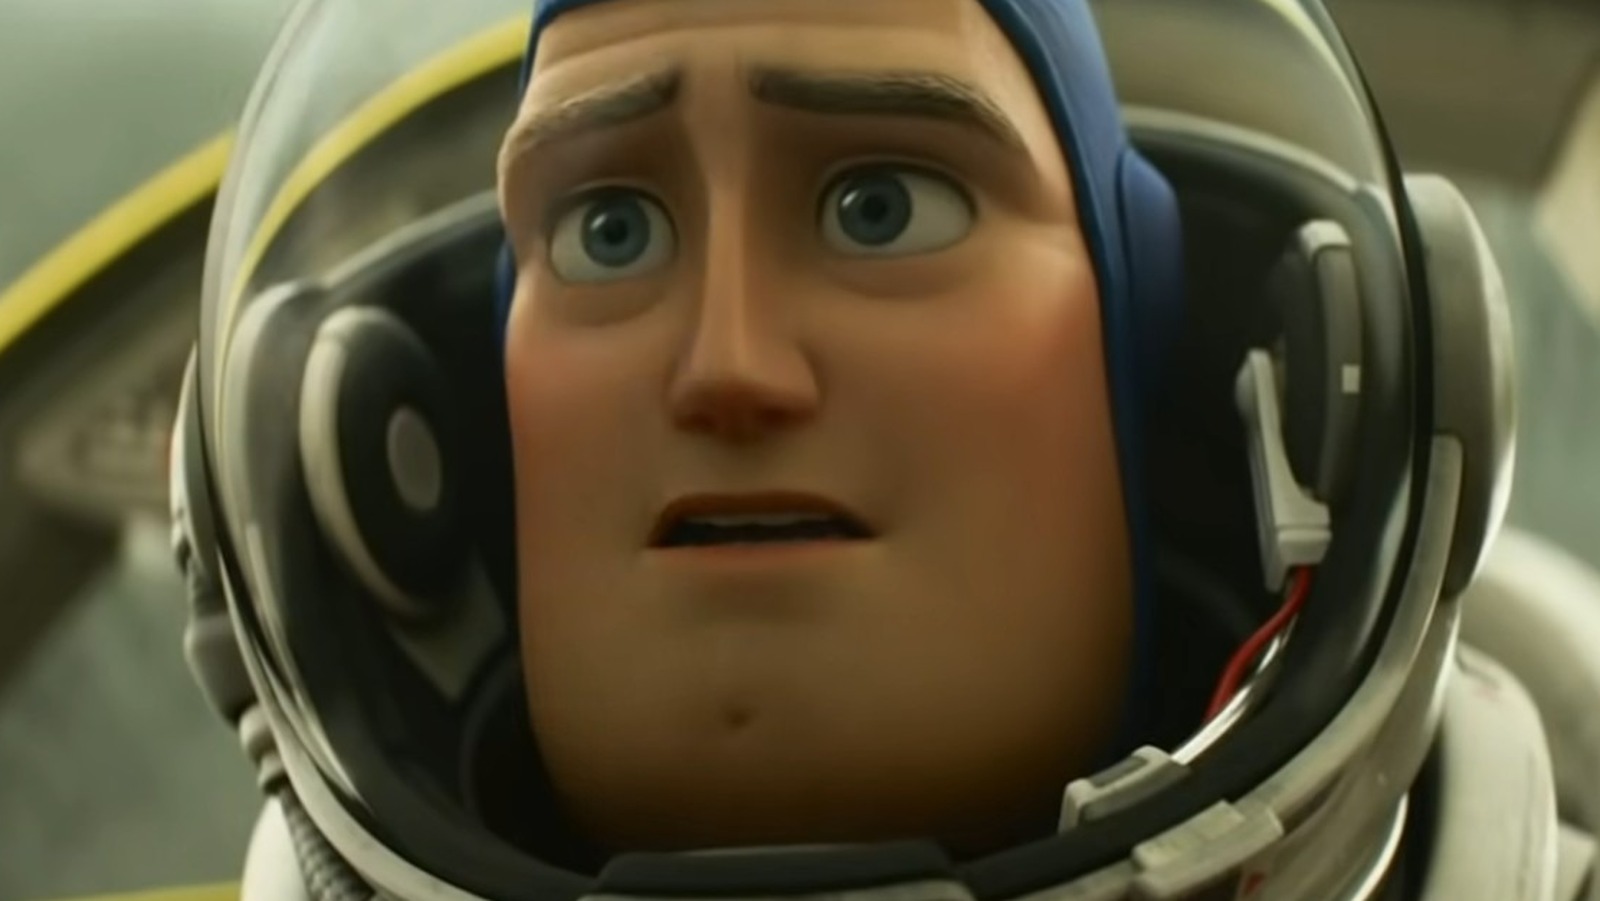 The Internet Can't Stop Talking About The New Buzz Lightyear